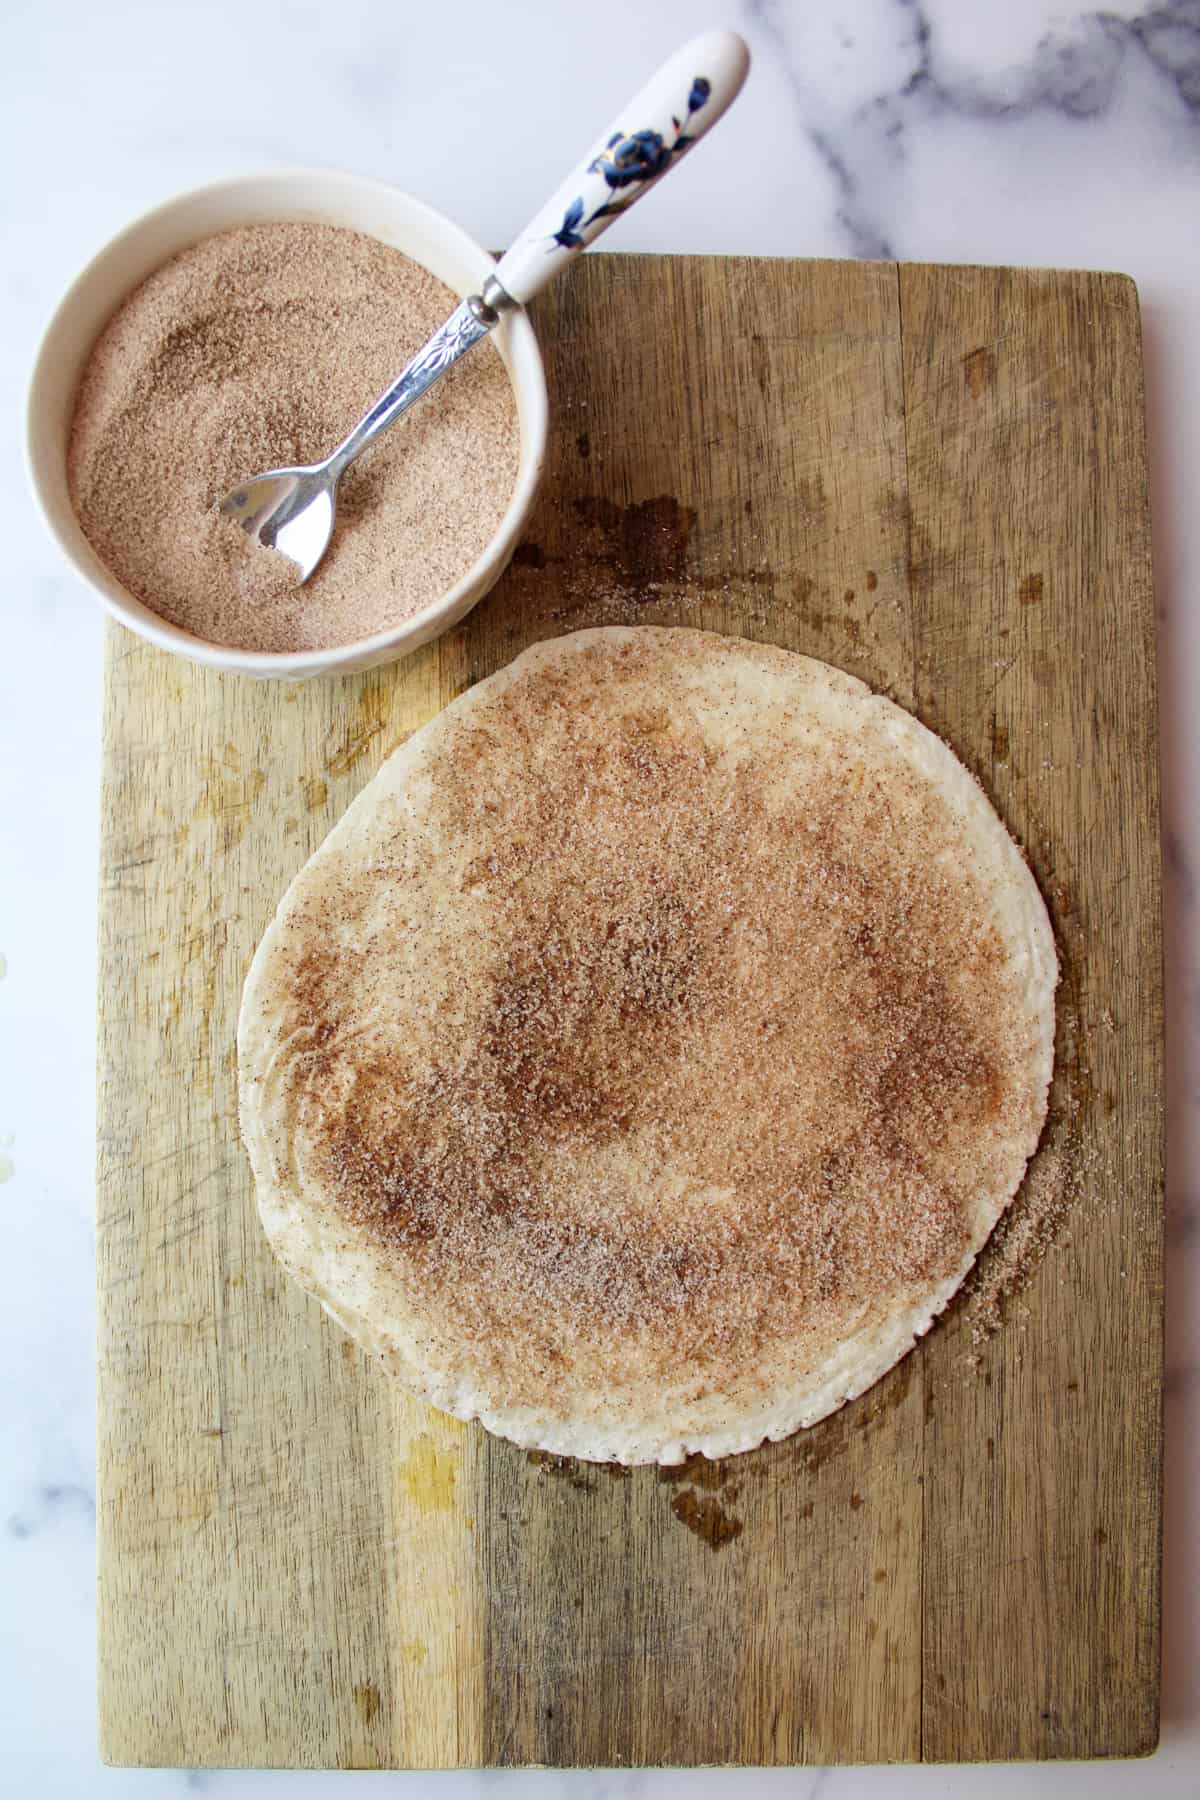 cinnamon sugar rubbed over tortilla with a bowl of cinnamon sugar and a spoon to the side.